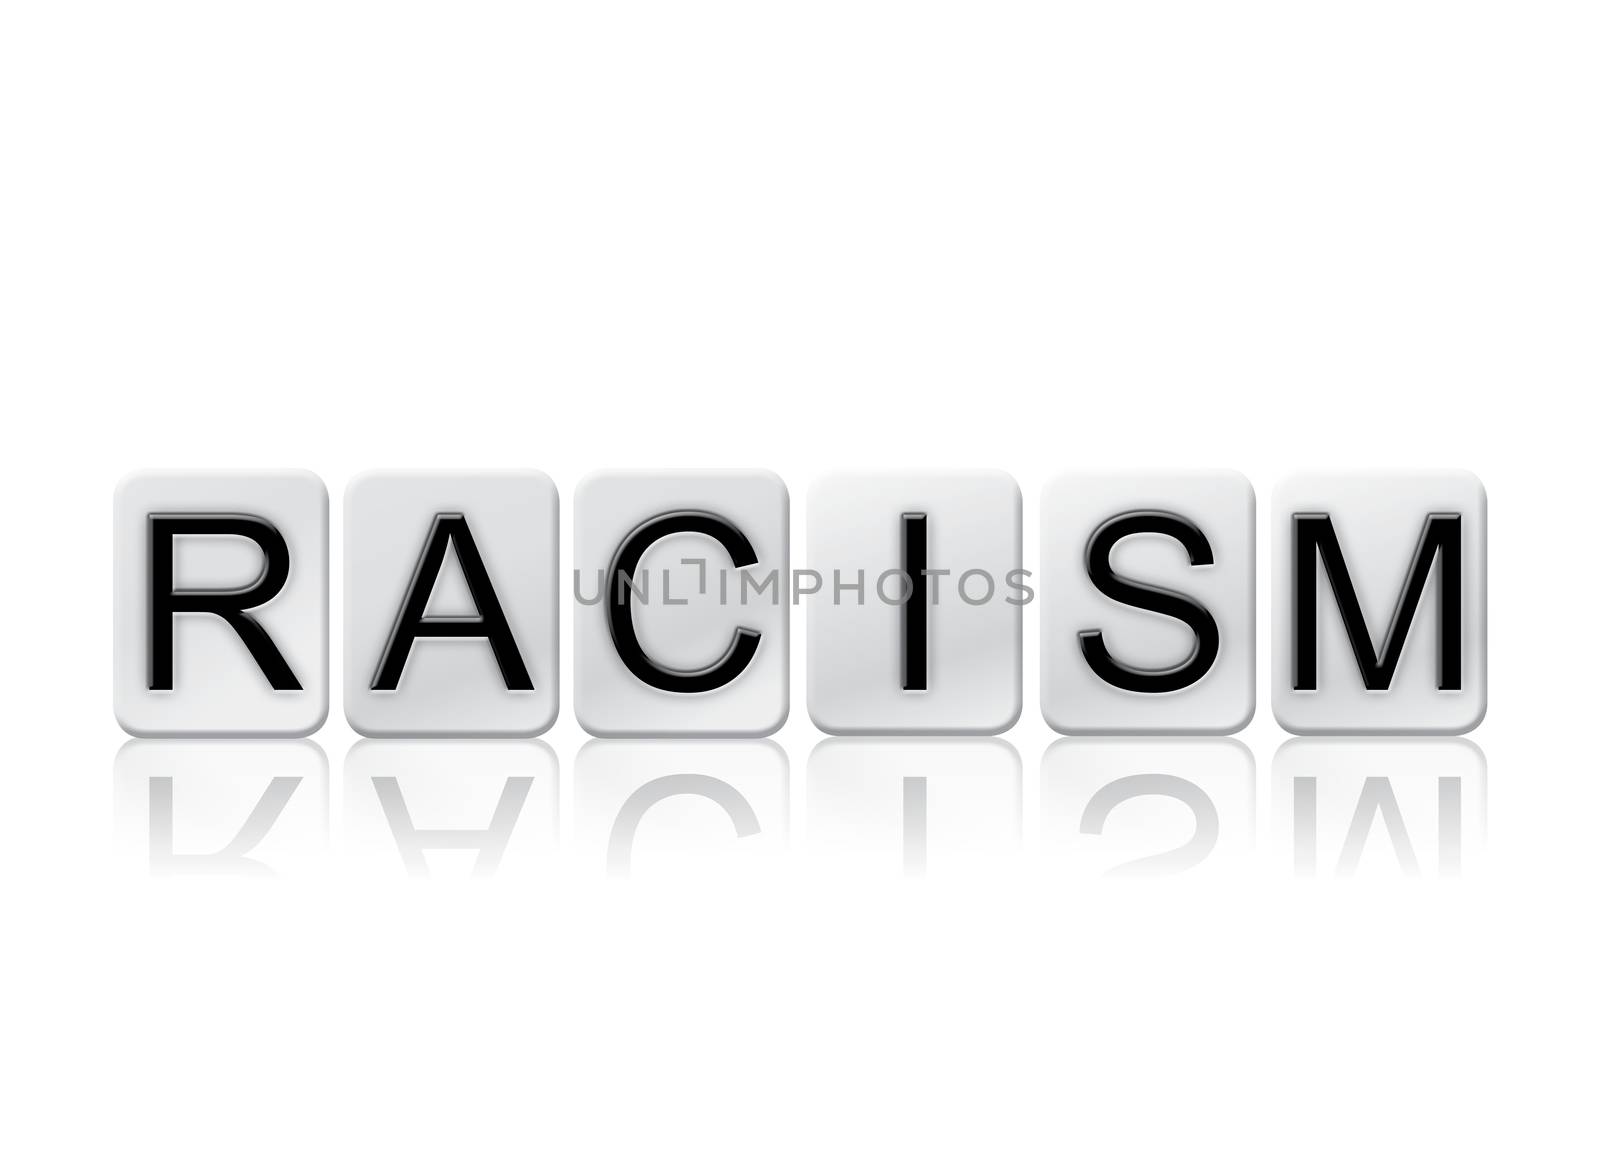 The word "Racism" written in tile letters isolated on a white background.